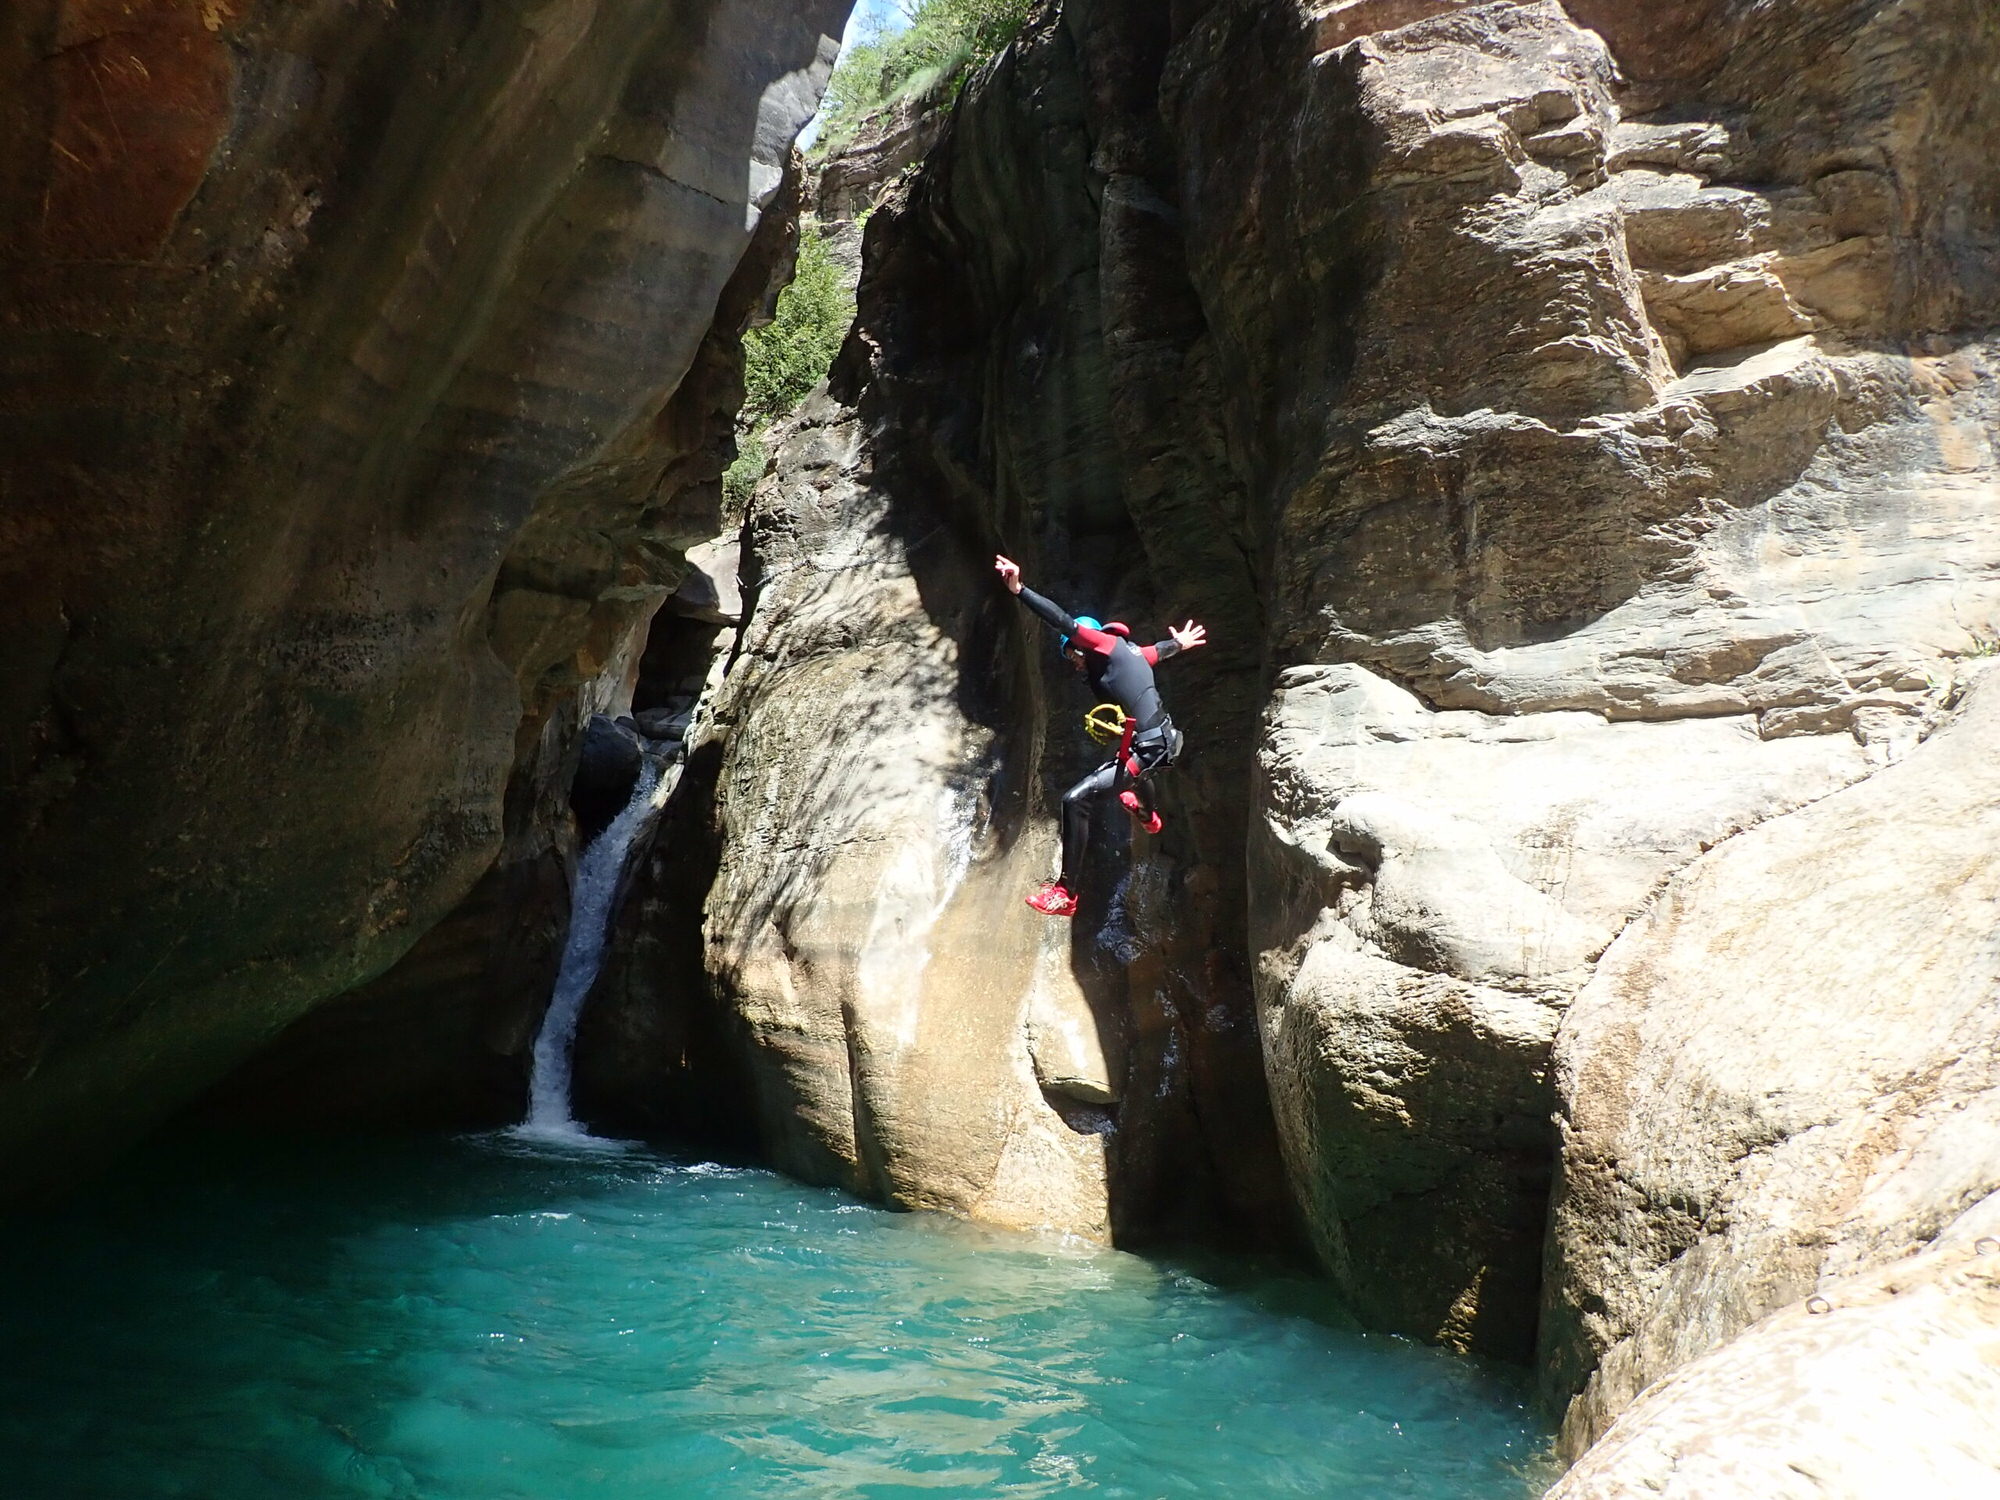 Jumping in the Gorgol canyon - Spanish Pyrenees